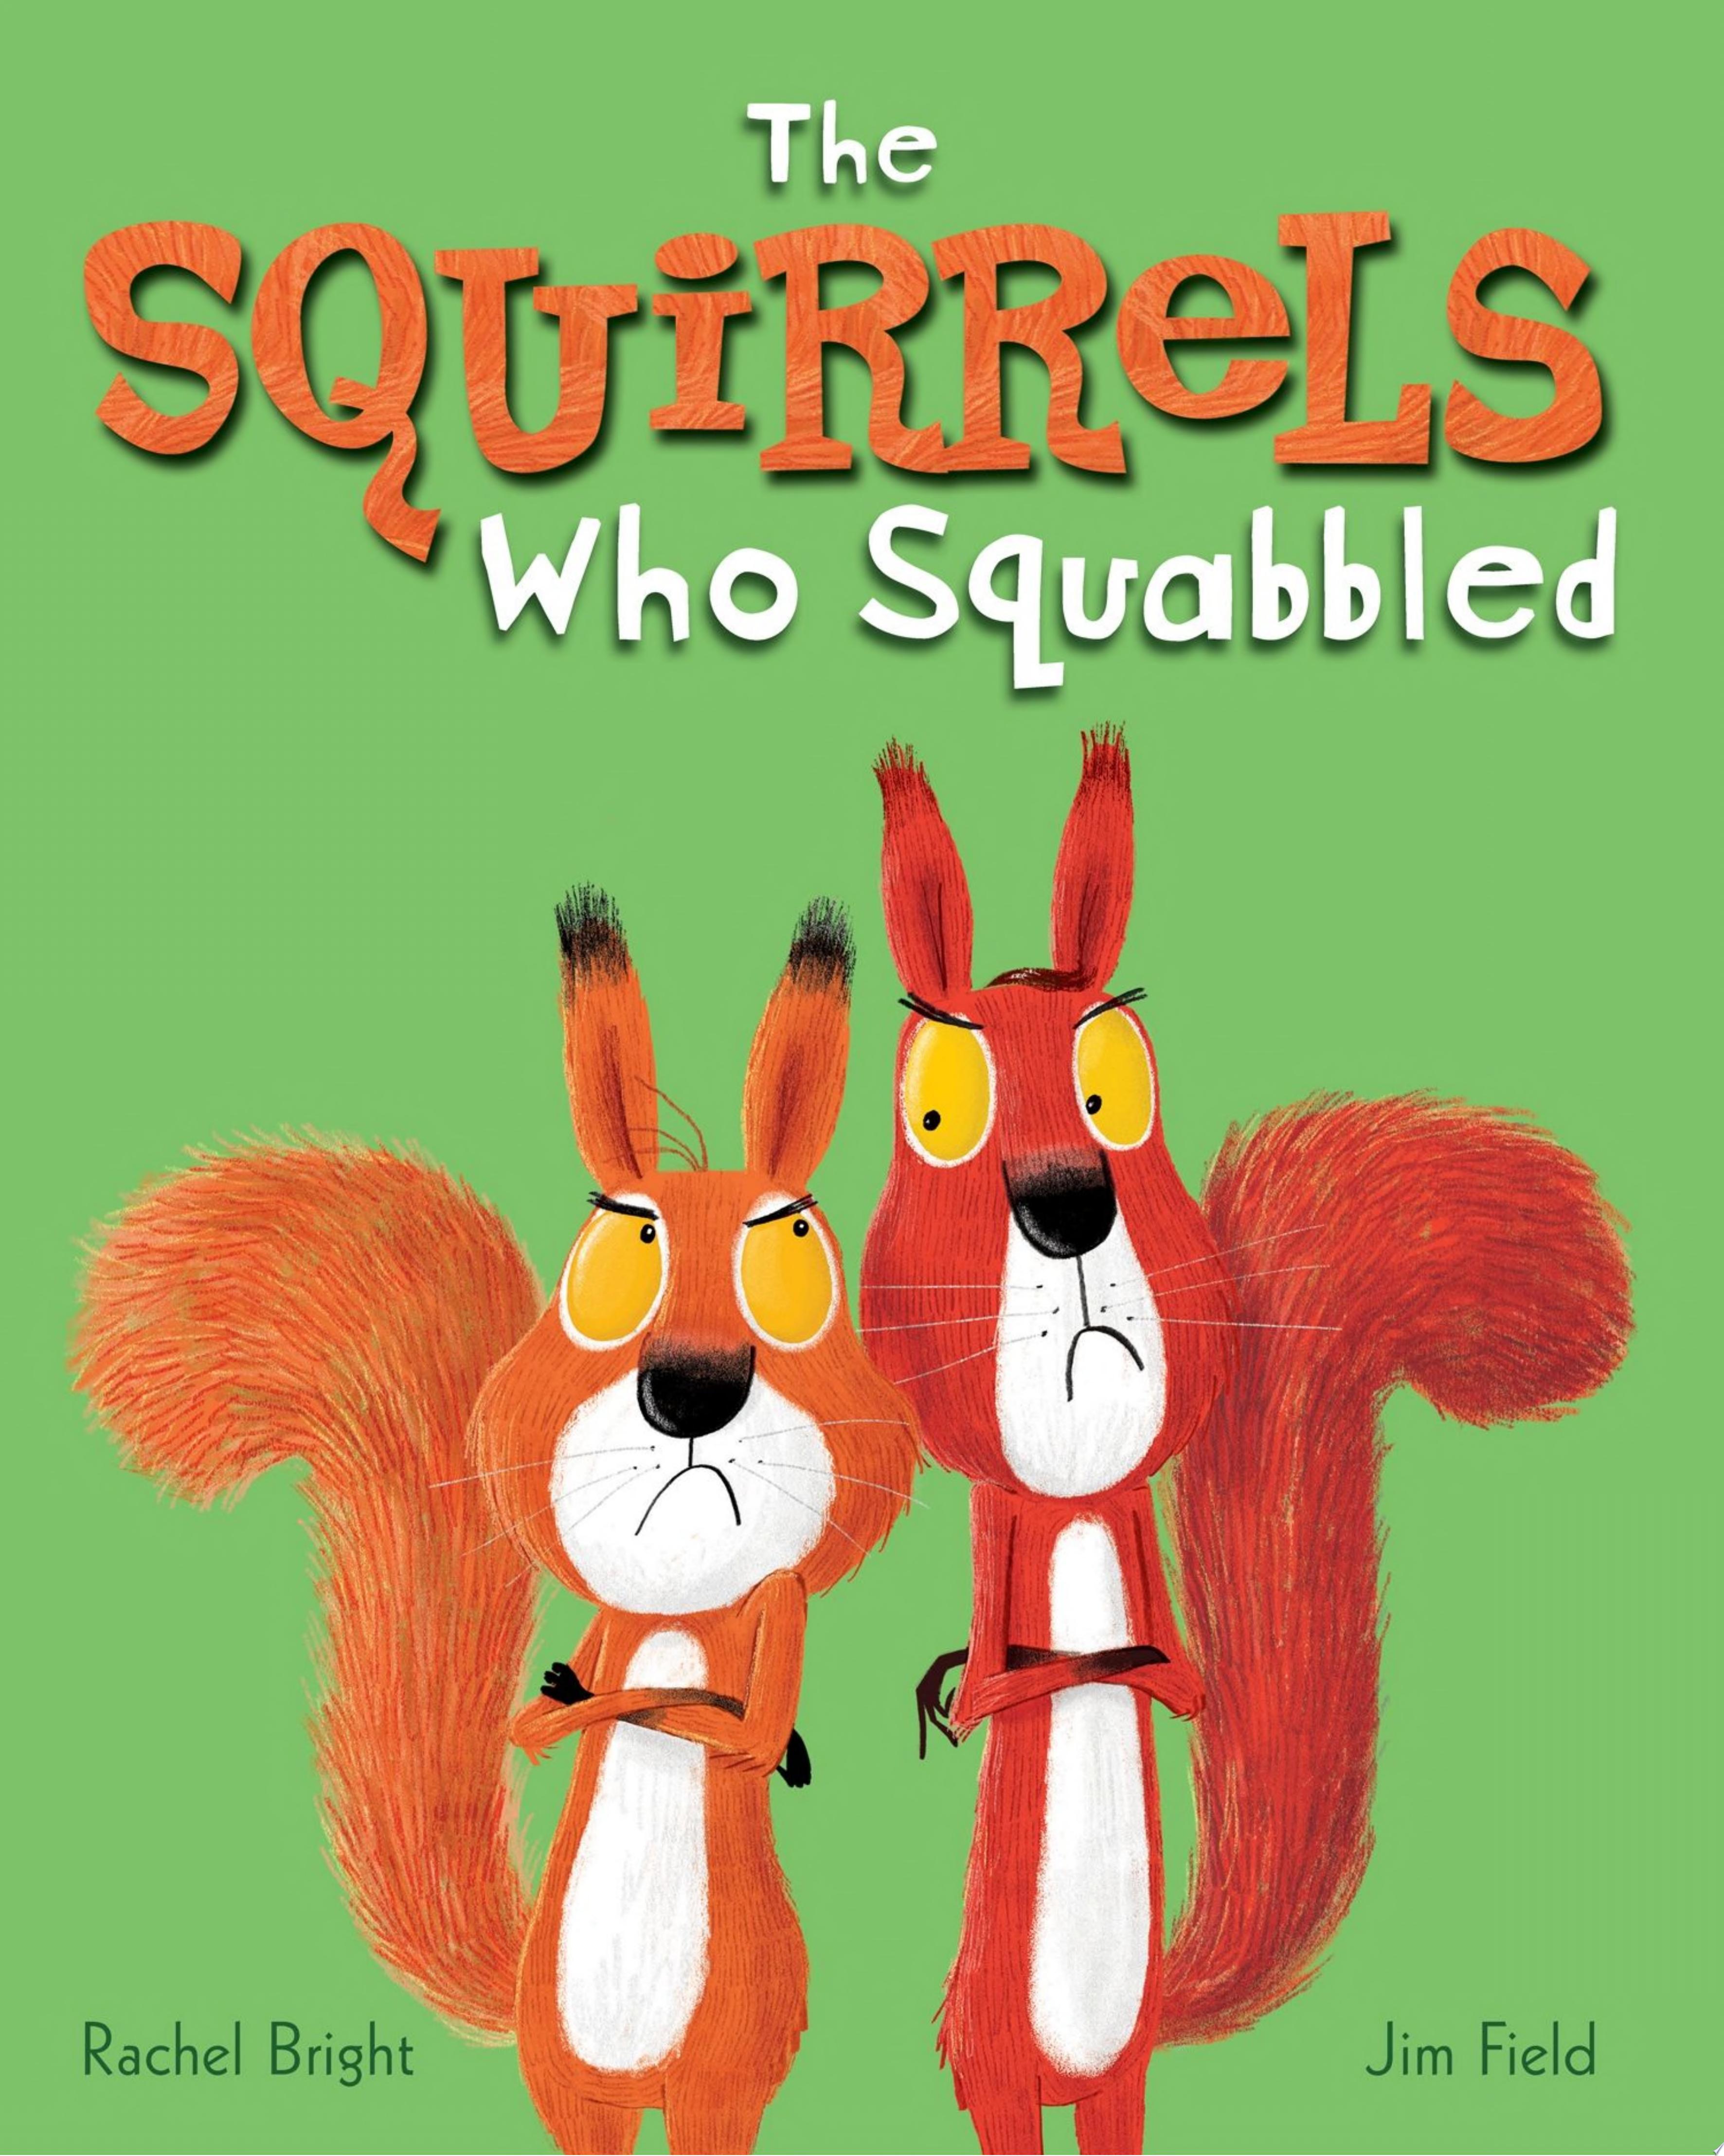 Image for "The Squirrels Who Squabbled"